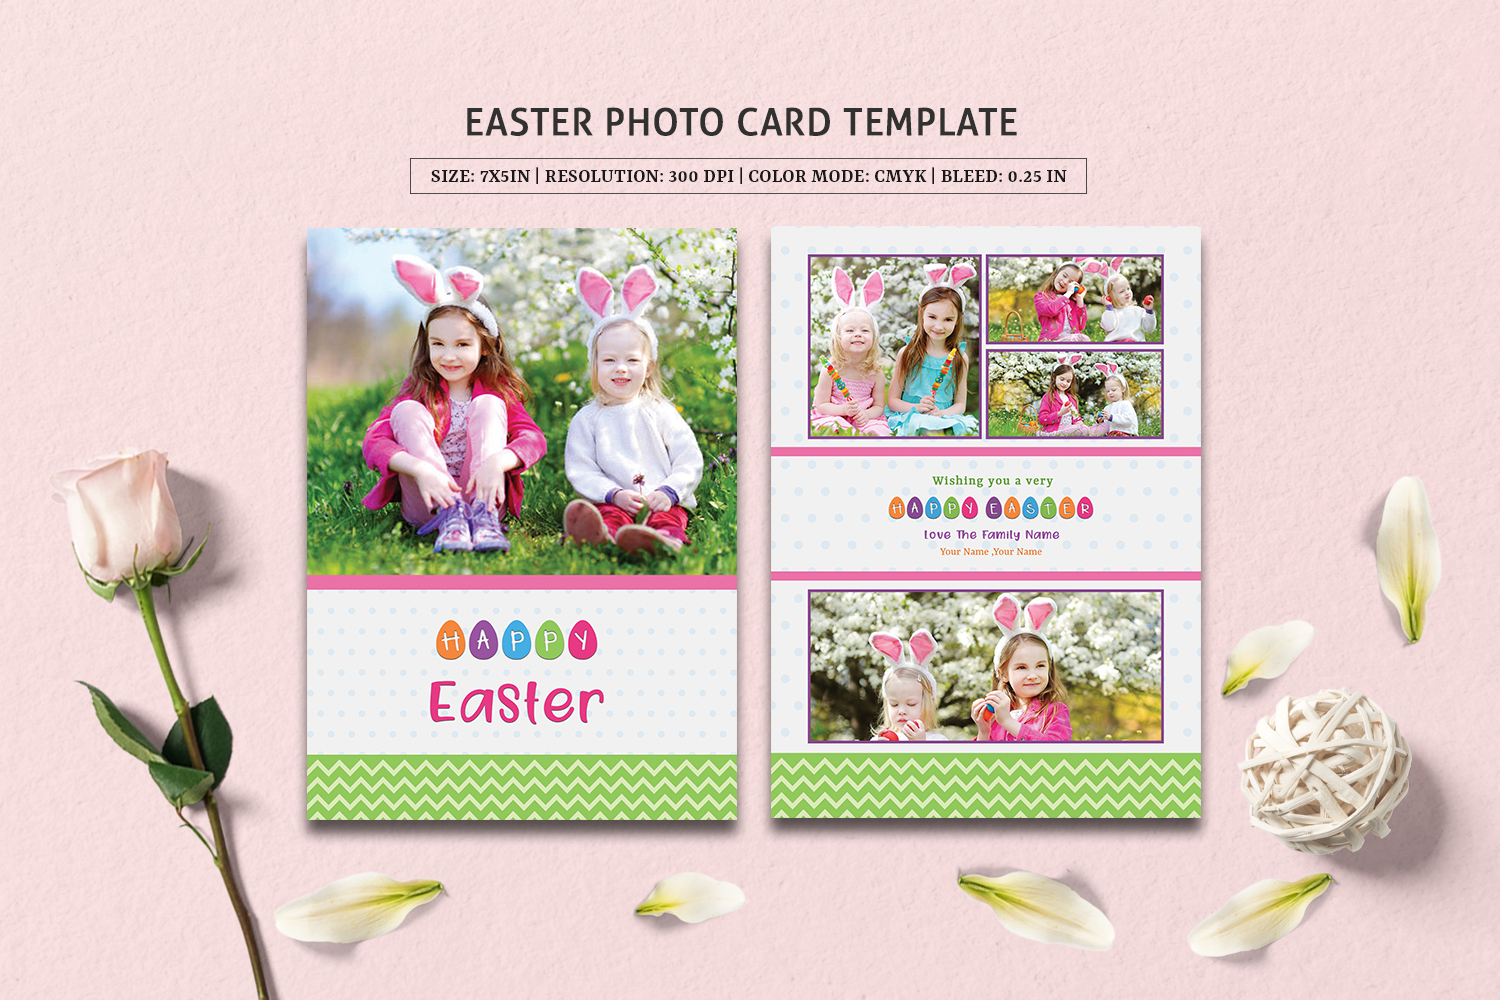 Easter Photo Greeting Card Corporate identity template